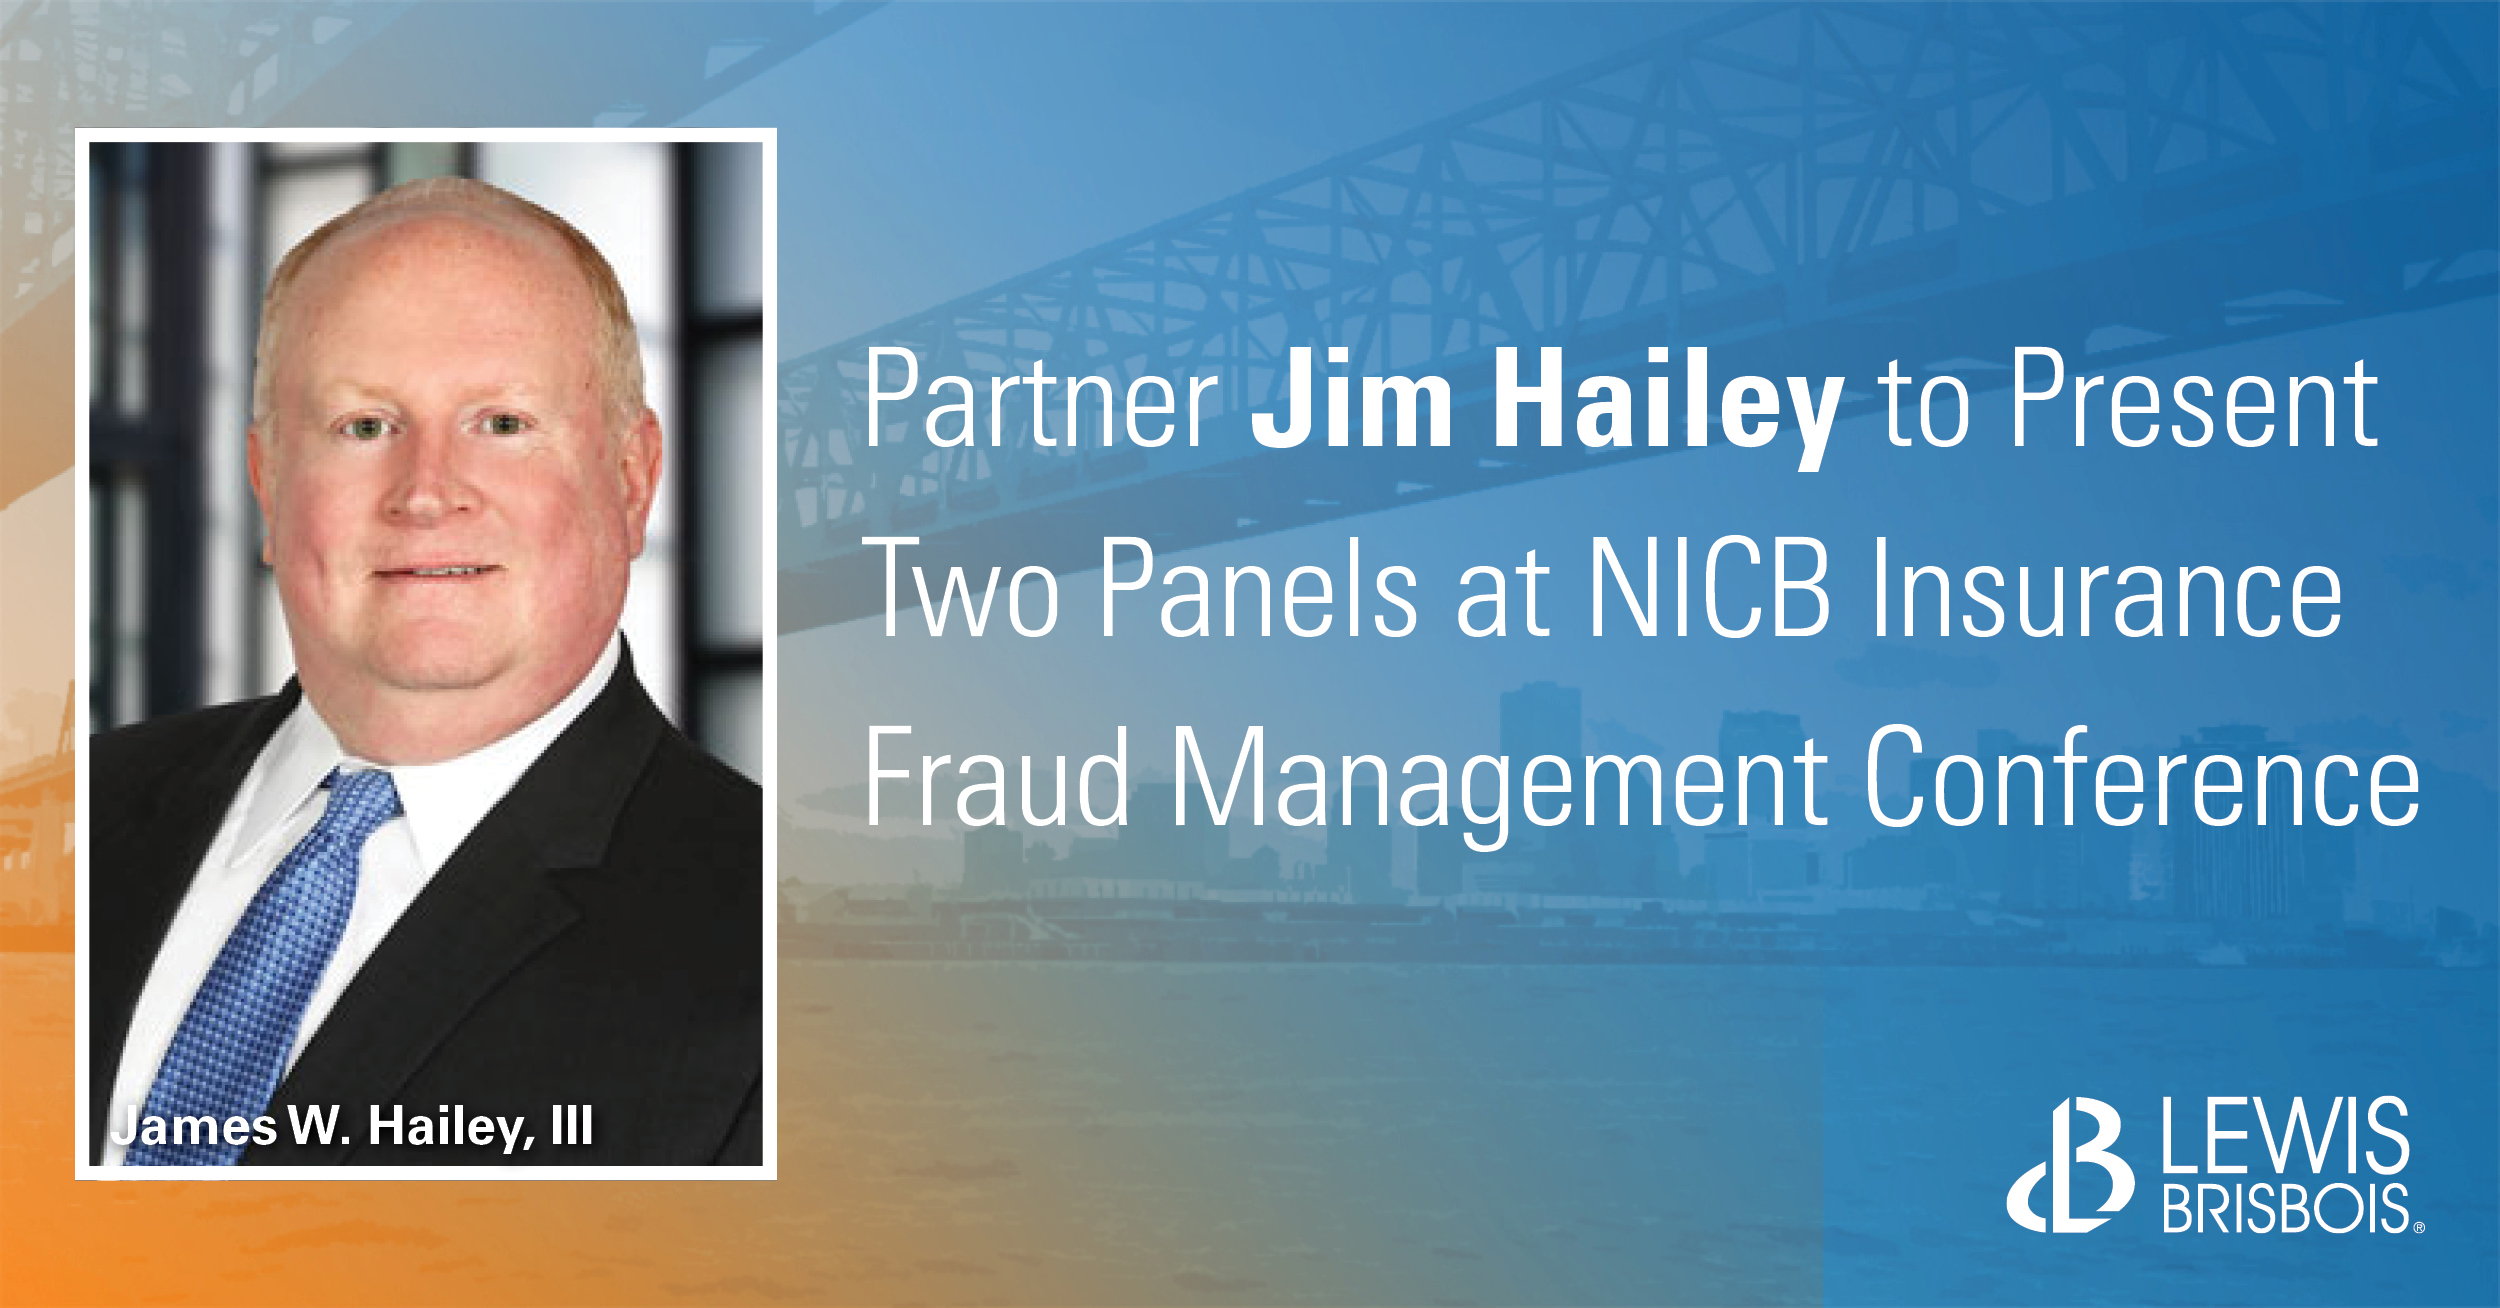 Jim Hailey to Present Two Panels at NICB Insurance Fraud Management